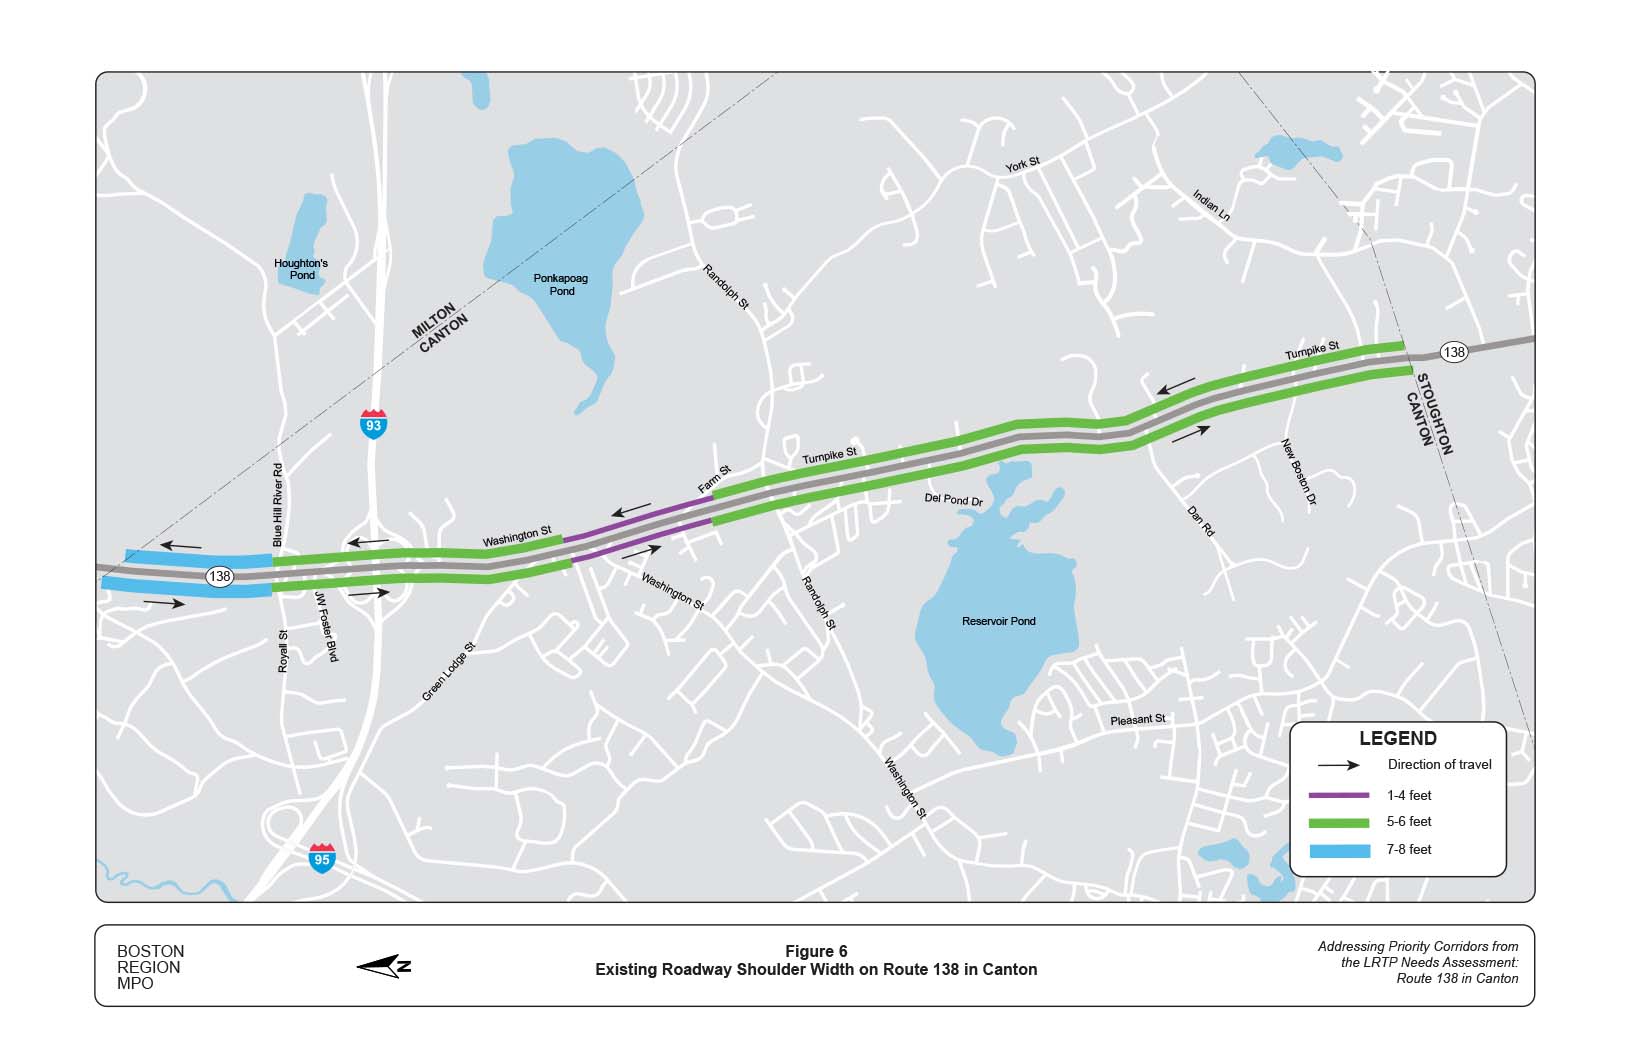 Figure 6 is a map of the study area showing the width of the shoulders on Route 138.